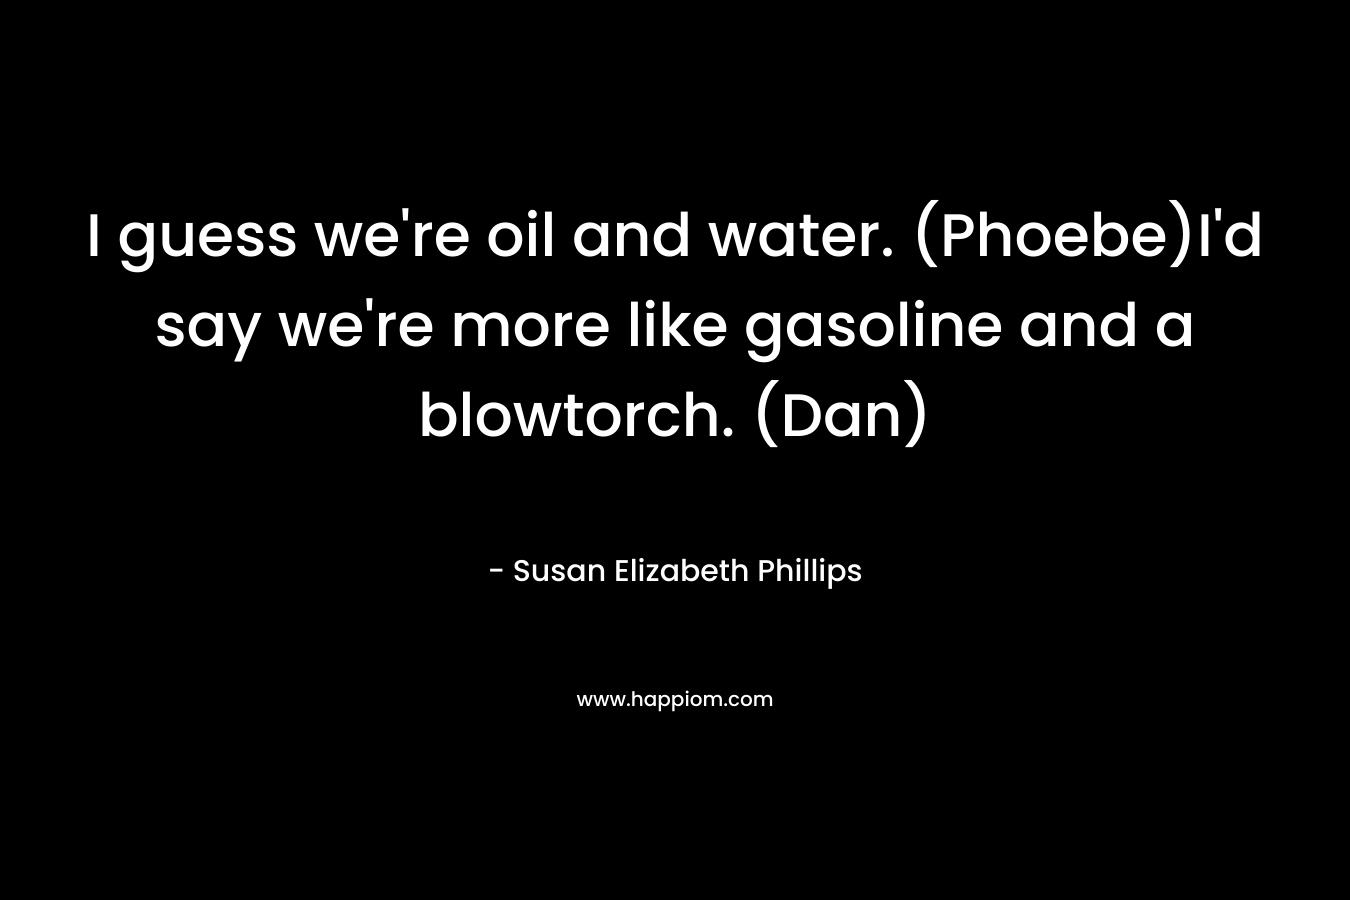 I guess we're oil and water. (Phoebe)I'd say we're more like gasoline and a blowtorch. (Dan)